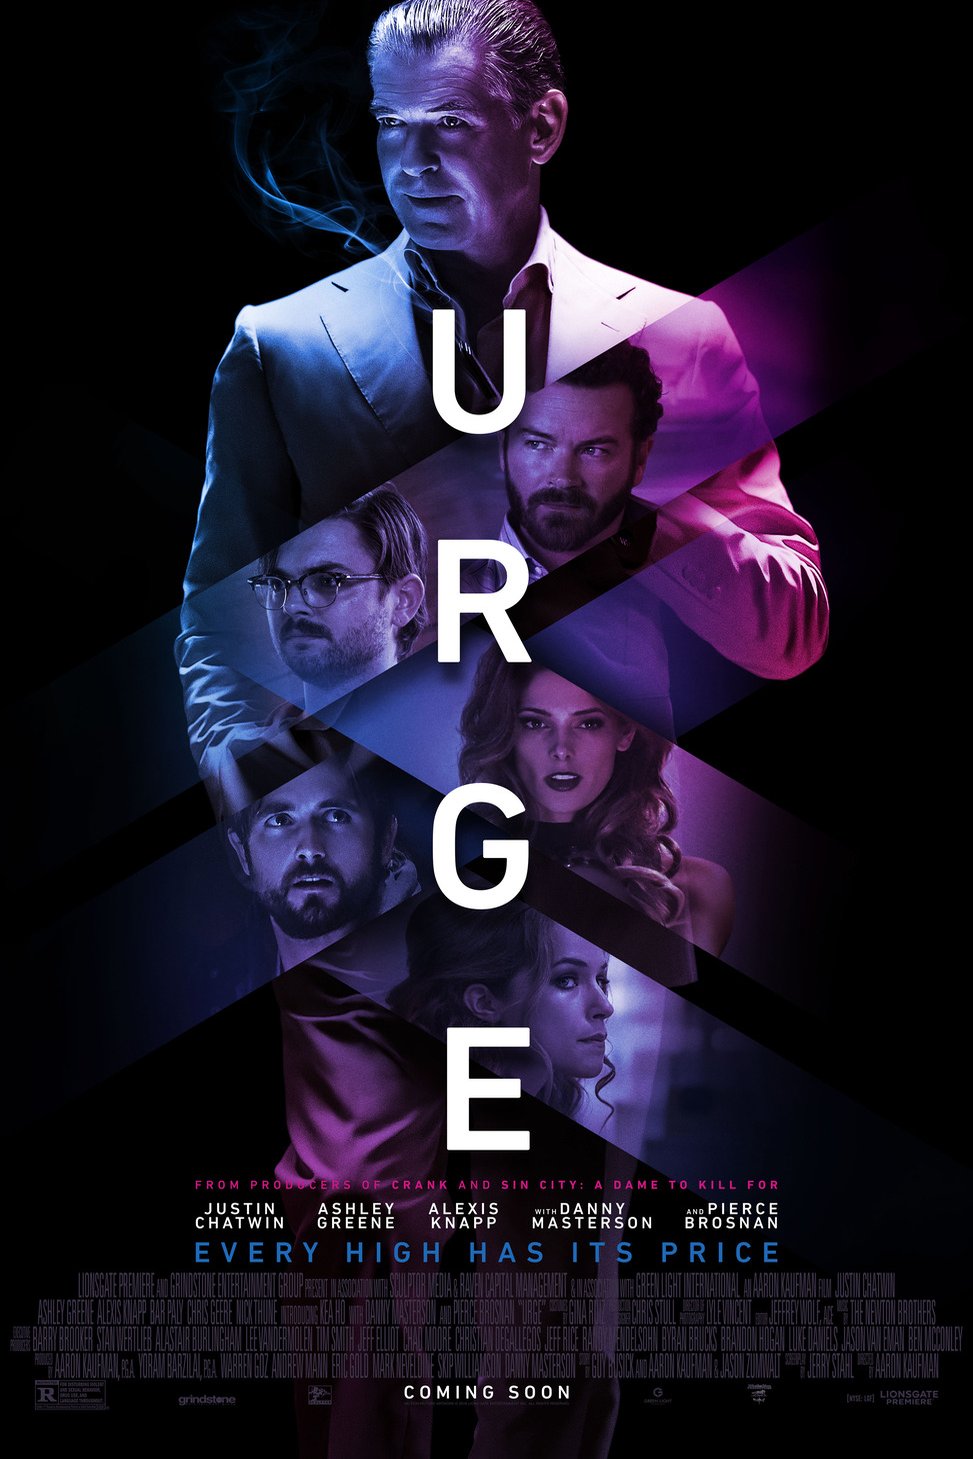 Poster of the movie Urge